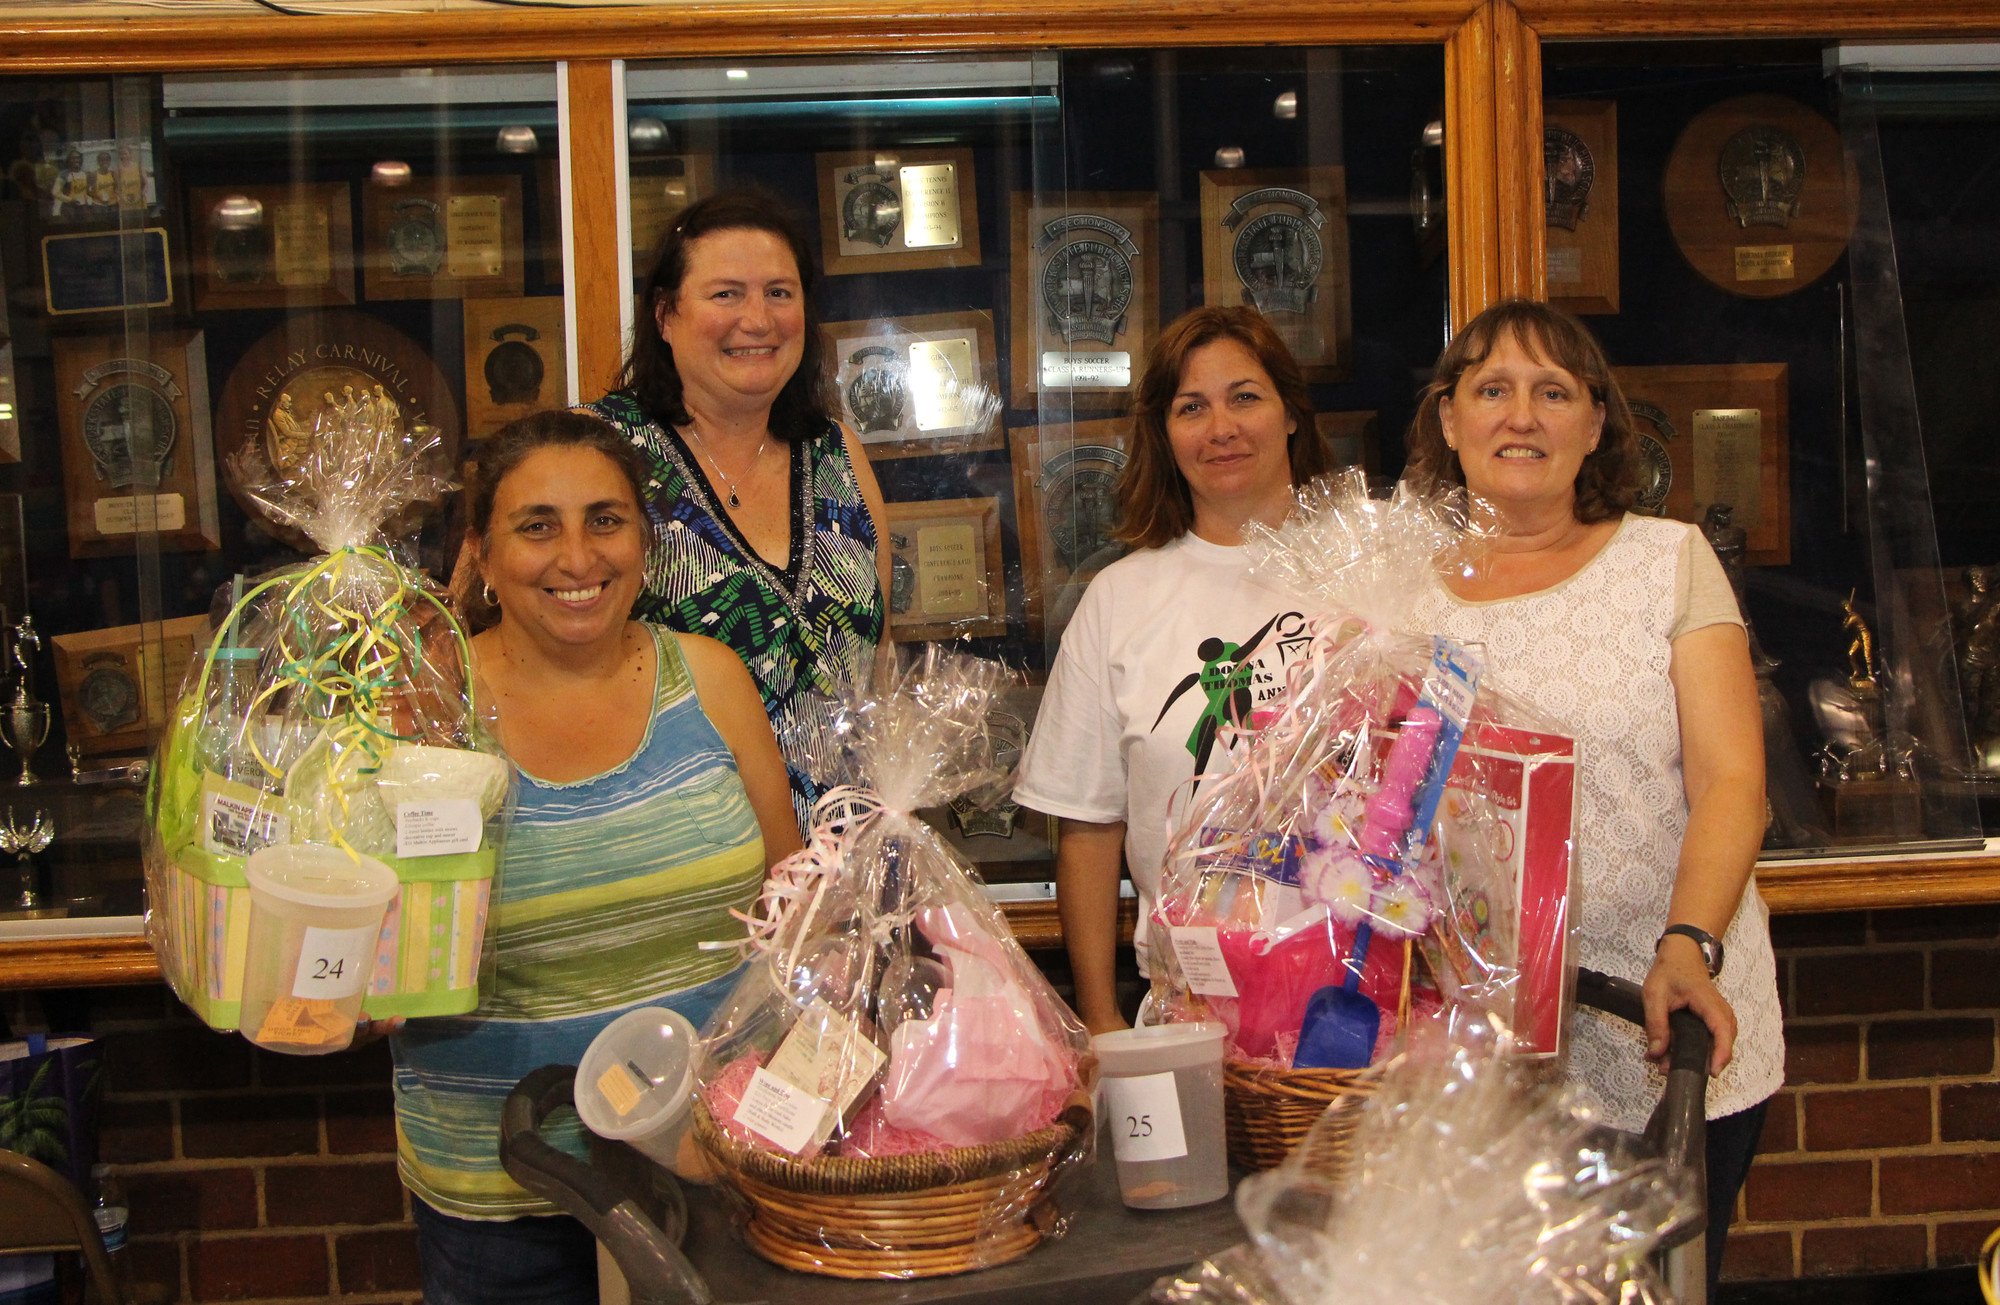 Volunteers sold raffle tickets and concessions during the event, including, from left, Renee Salmon, Lori Murray, Lori Brady and Lynn Maniace.